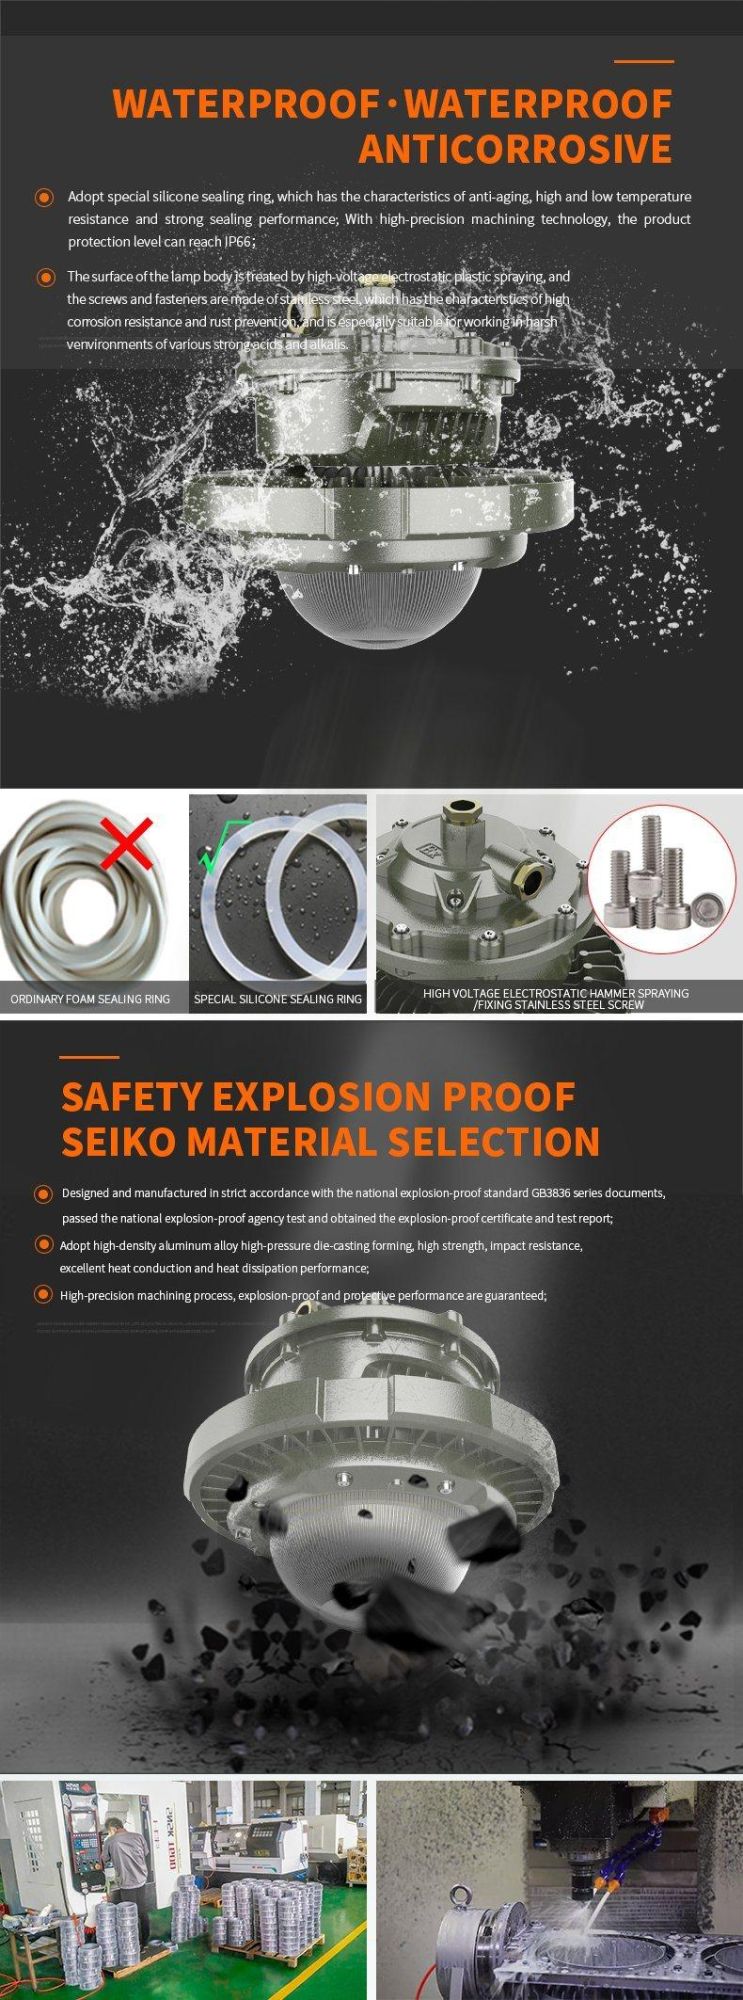 UFO Industrial Proof Explosion LED High Bay Light for Atex Zone 1 Zone2